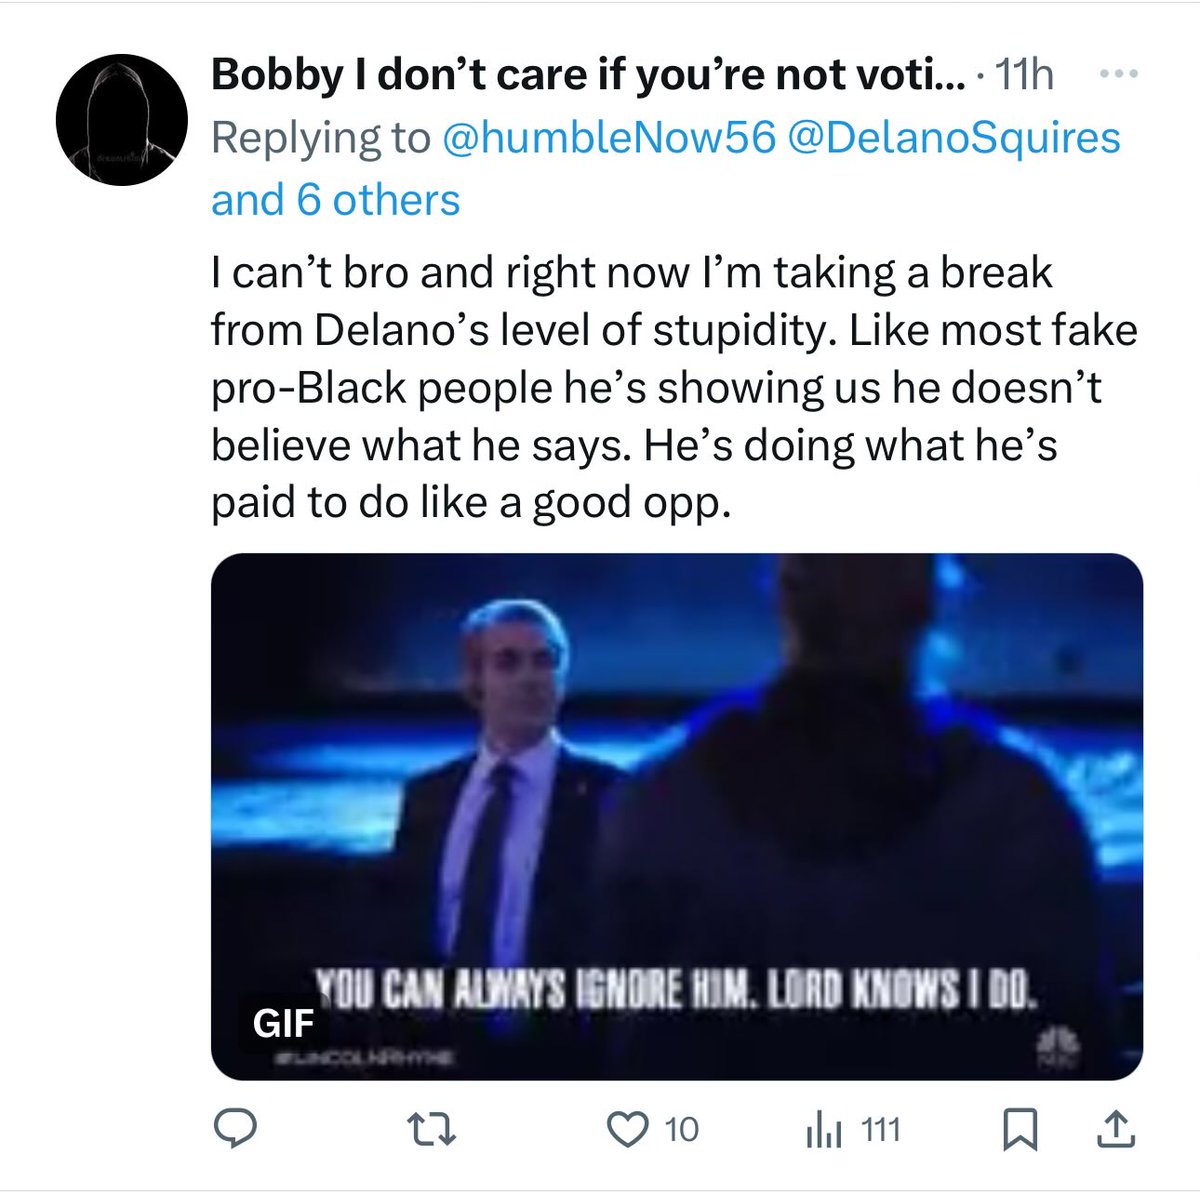 @WWChemMath @DelanoSquires @DrALT14 @shawnesjplife @humbleNow56 @DS_TheKing1 @PaulLee346 @LikeButta3 @jasonwhitlock26 That and he couldn’t go 30 seconds without attacking a Black person unnecessarily. He’s also predictable running to say he’s interested in how Black people move. That’s why I posted this about him earlier.